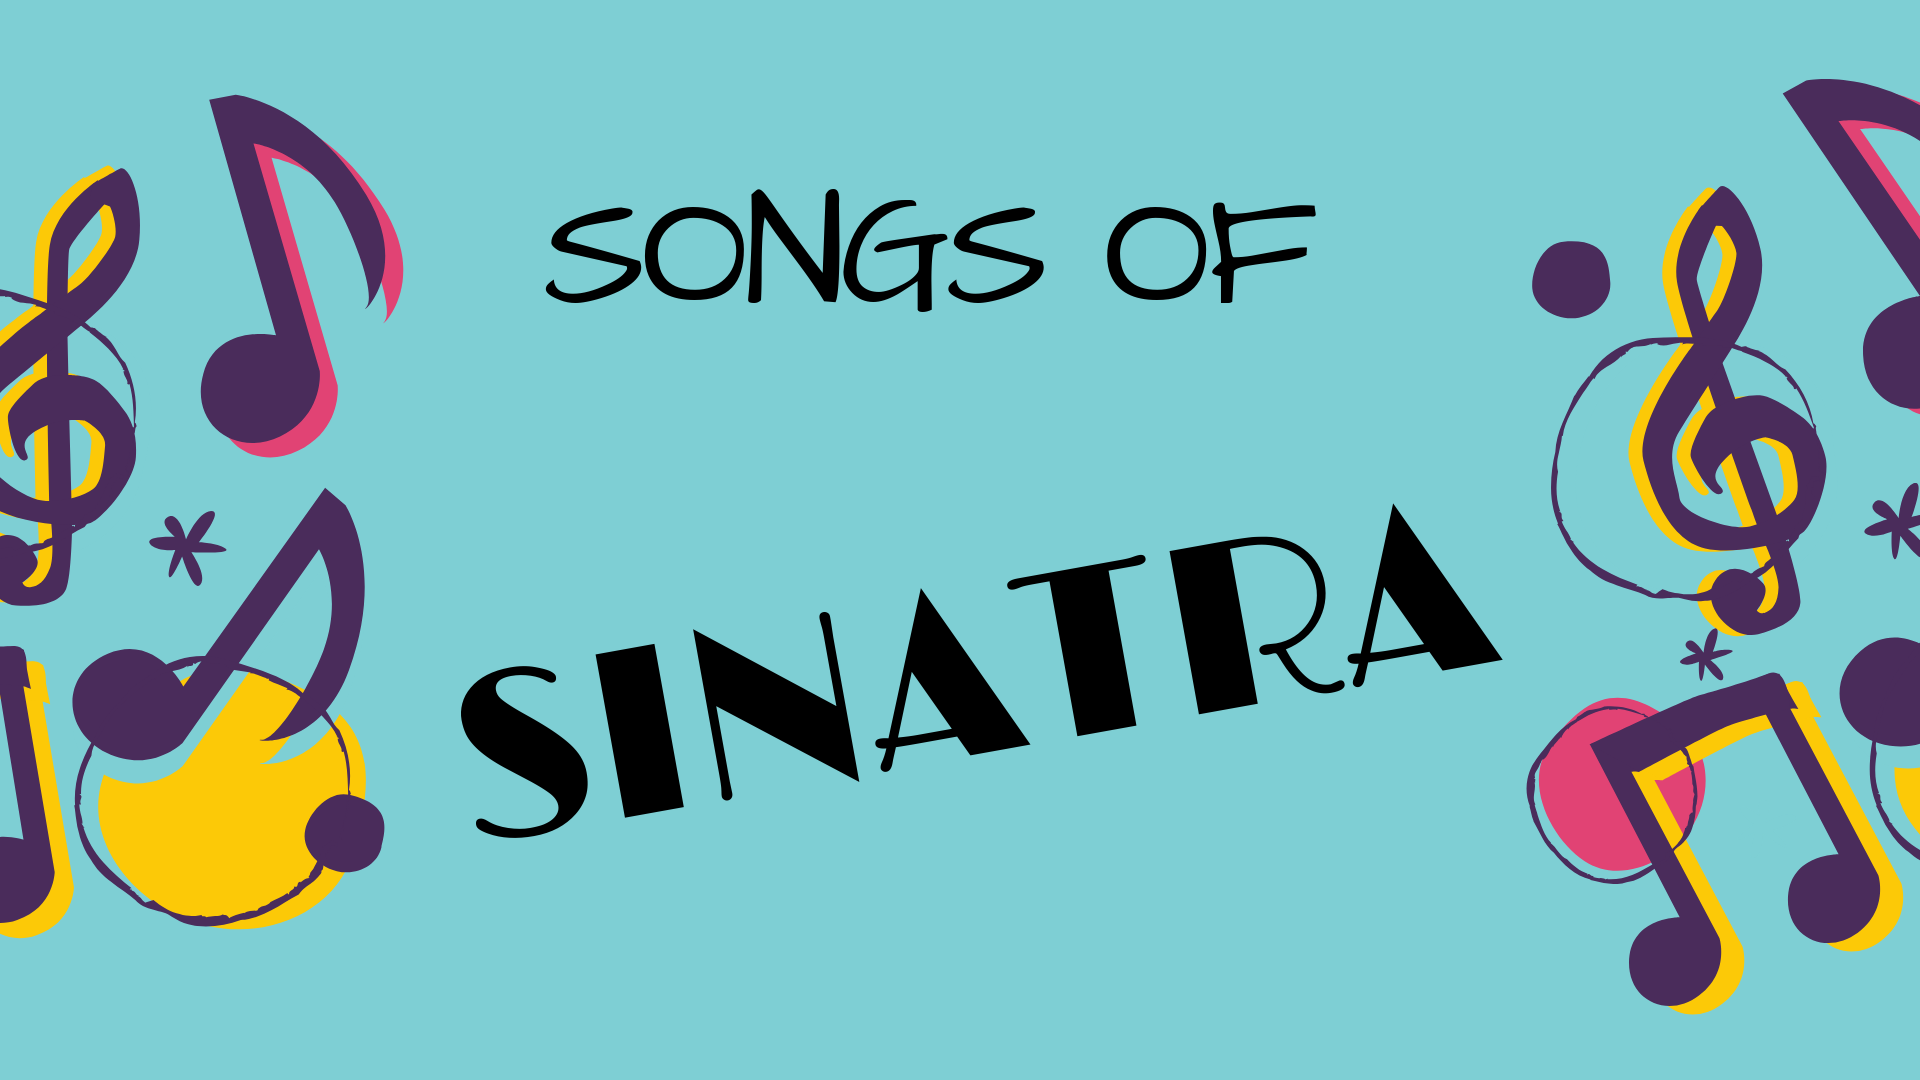 Blue background with colorful music notes. Text reads: Songs of Sinatra